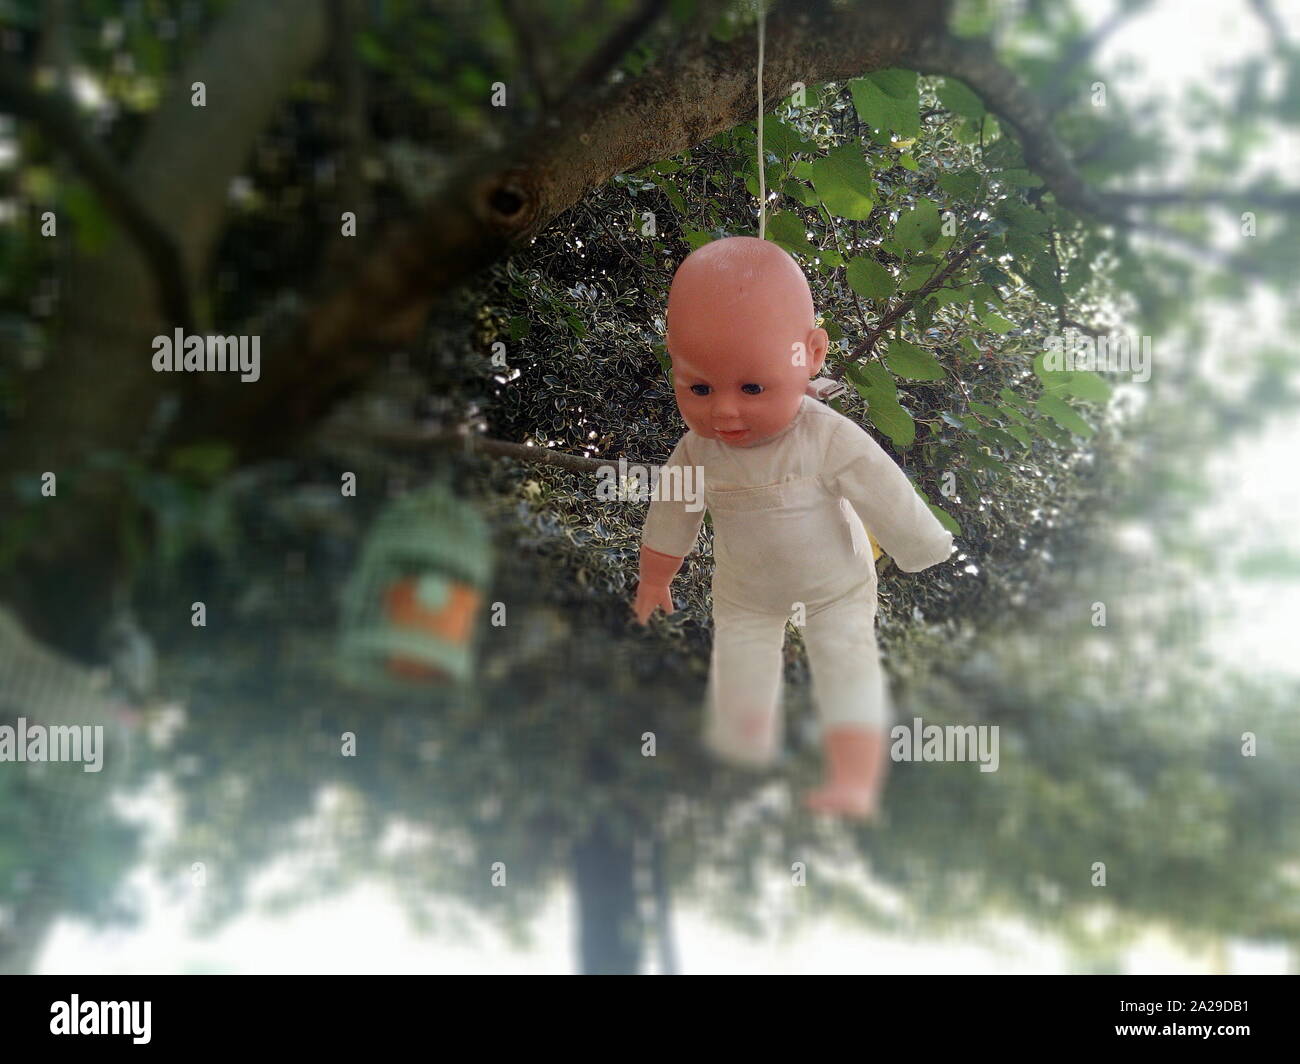 A scary mutilted doll hanged over a tree Stock Photo